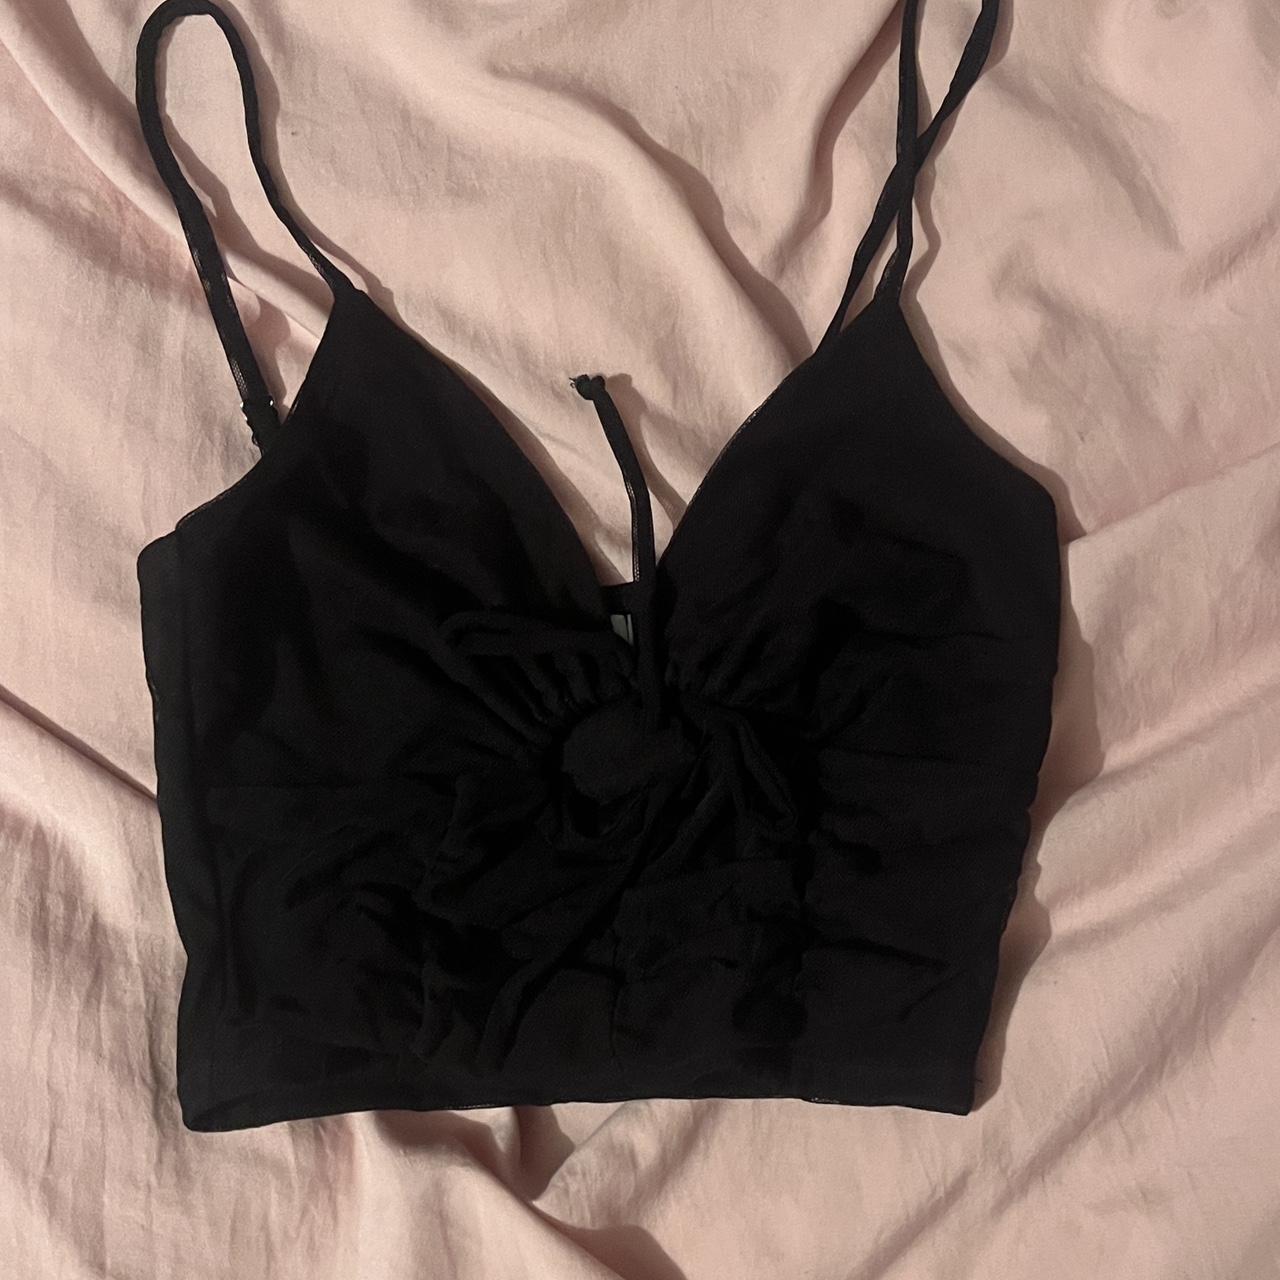 Urban Outfitters Women's Black Crop-top